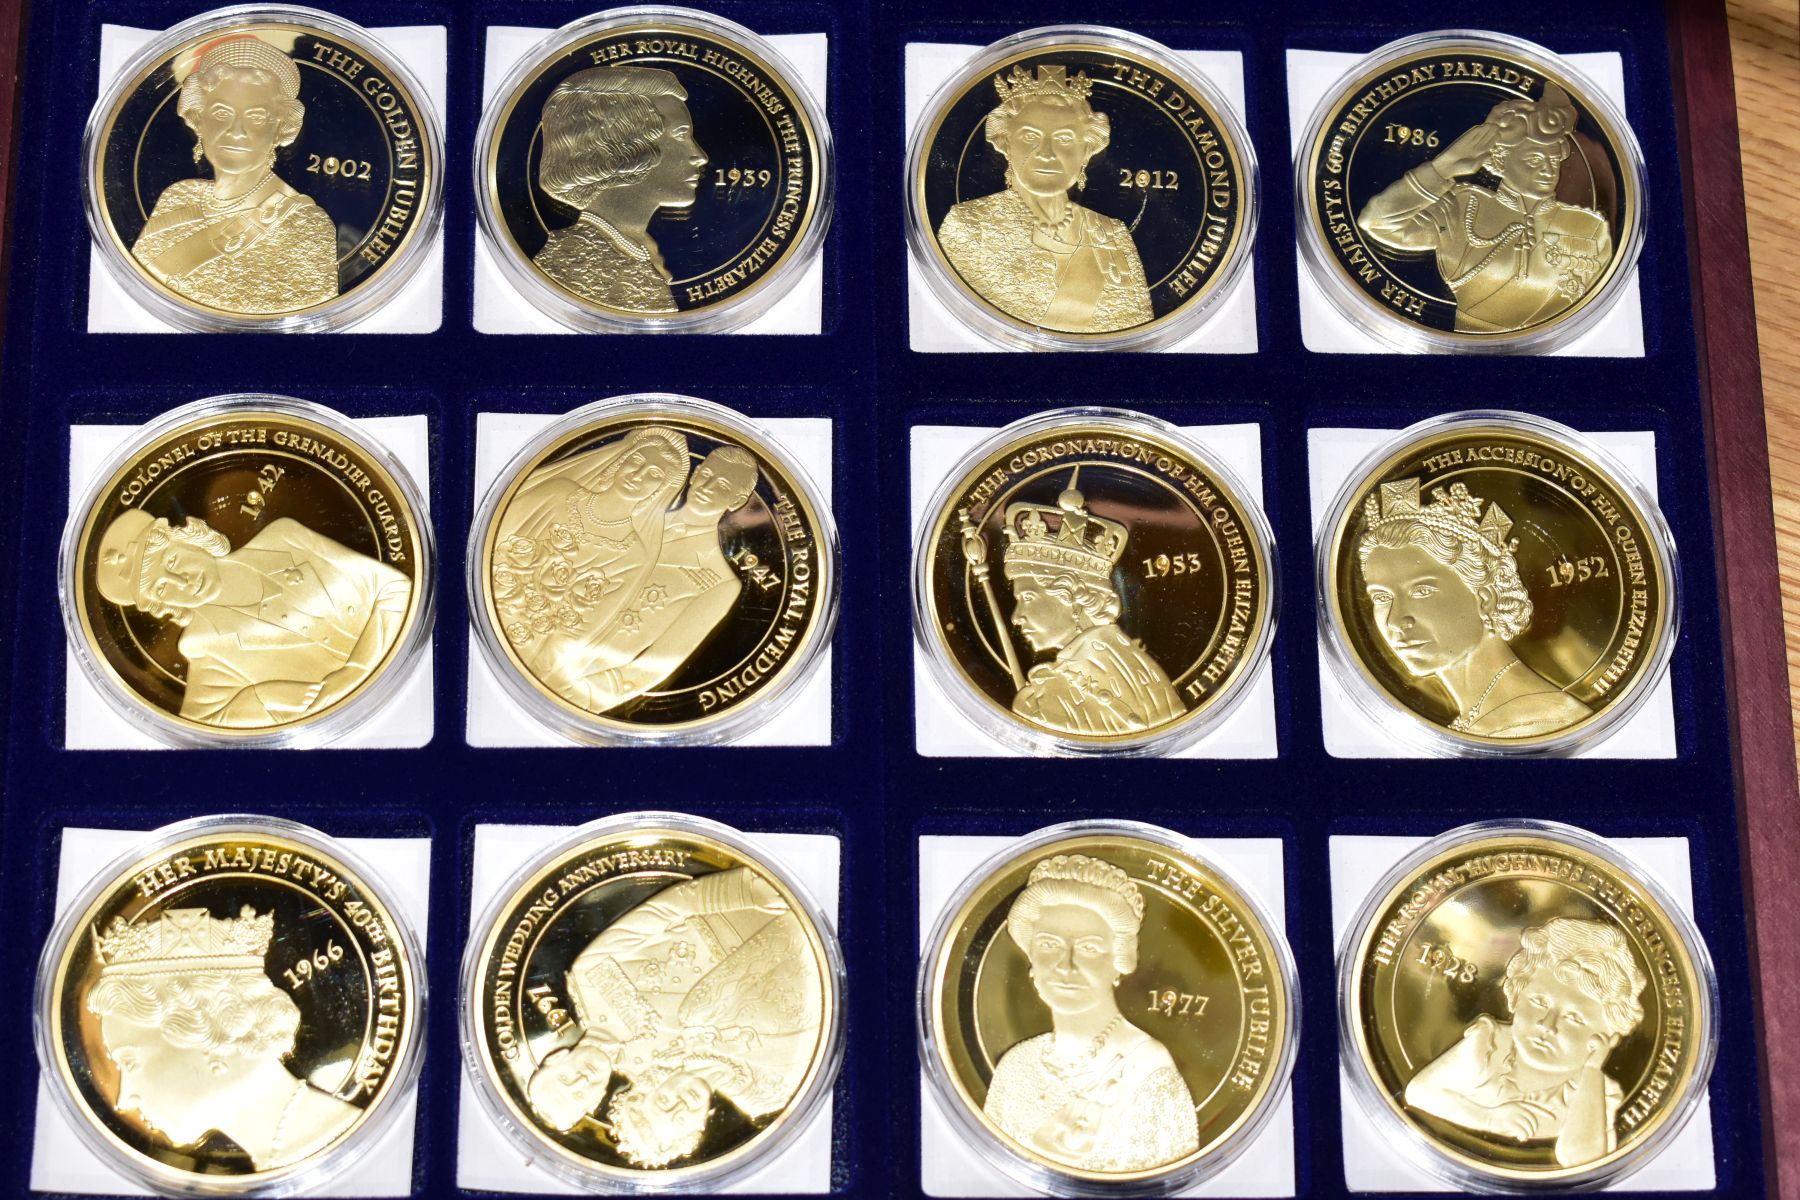 TWO COMMEMORATIVE GOLD PLATED PROOF COIN SETS, each coin featuring portraits of Queen Elizabeth II - Image 2 of 5